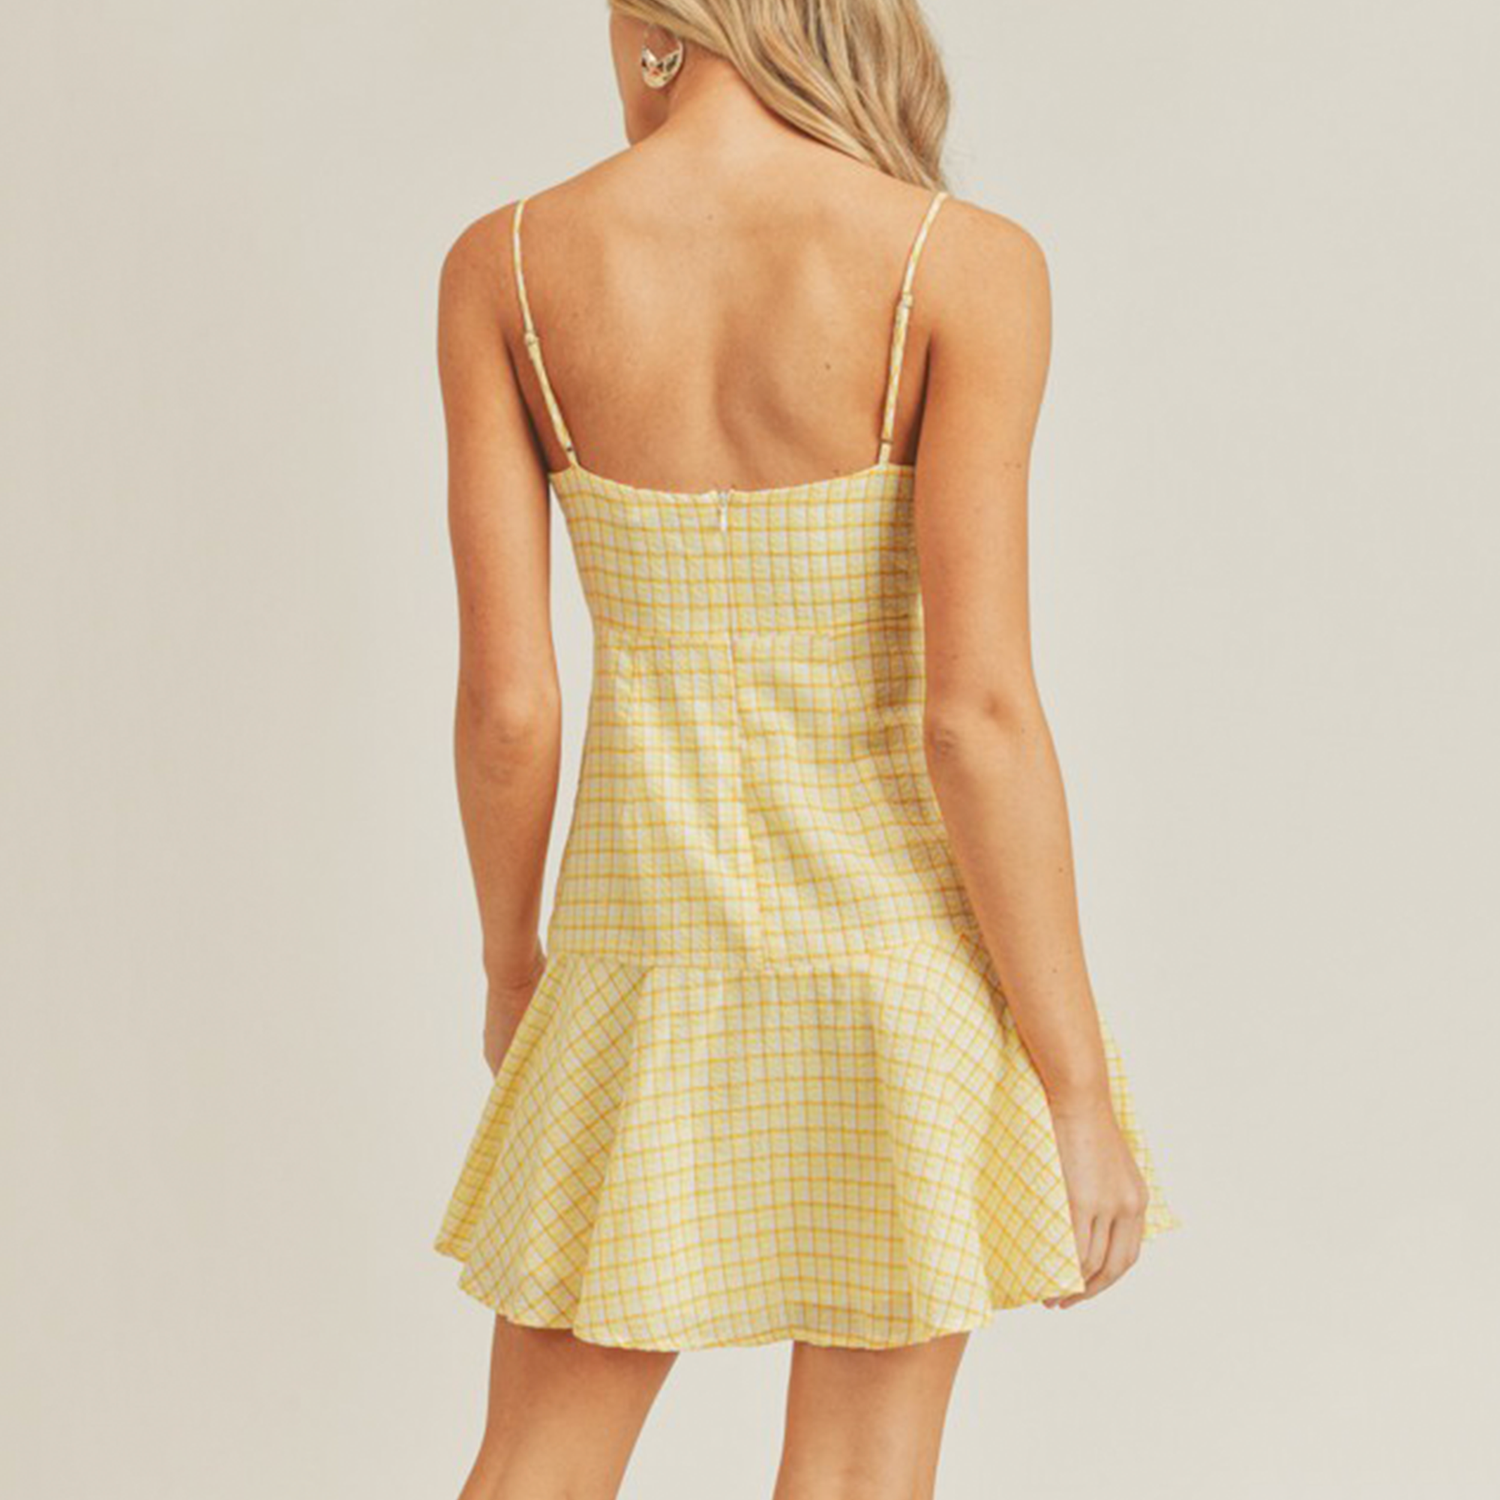 Grid Print Mini Dress. This cute dress is a great go-to summer staple that is comfortable and stylish